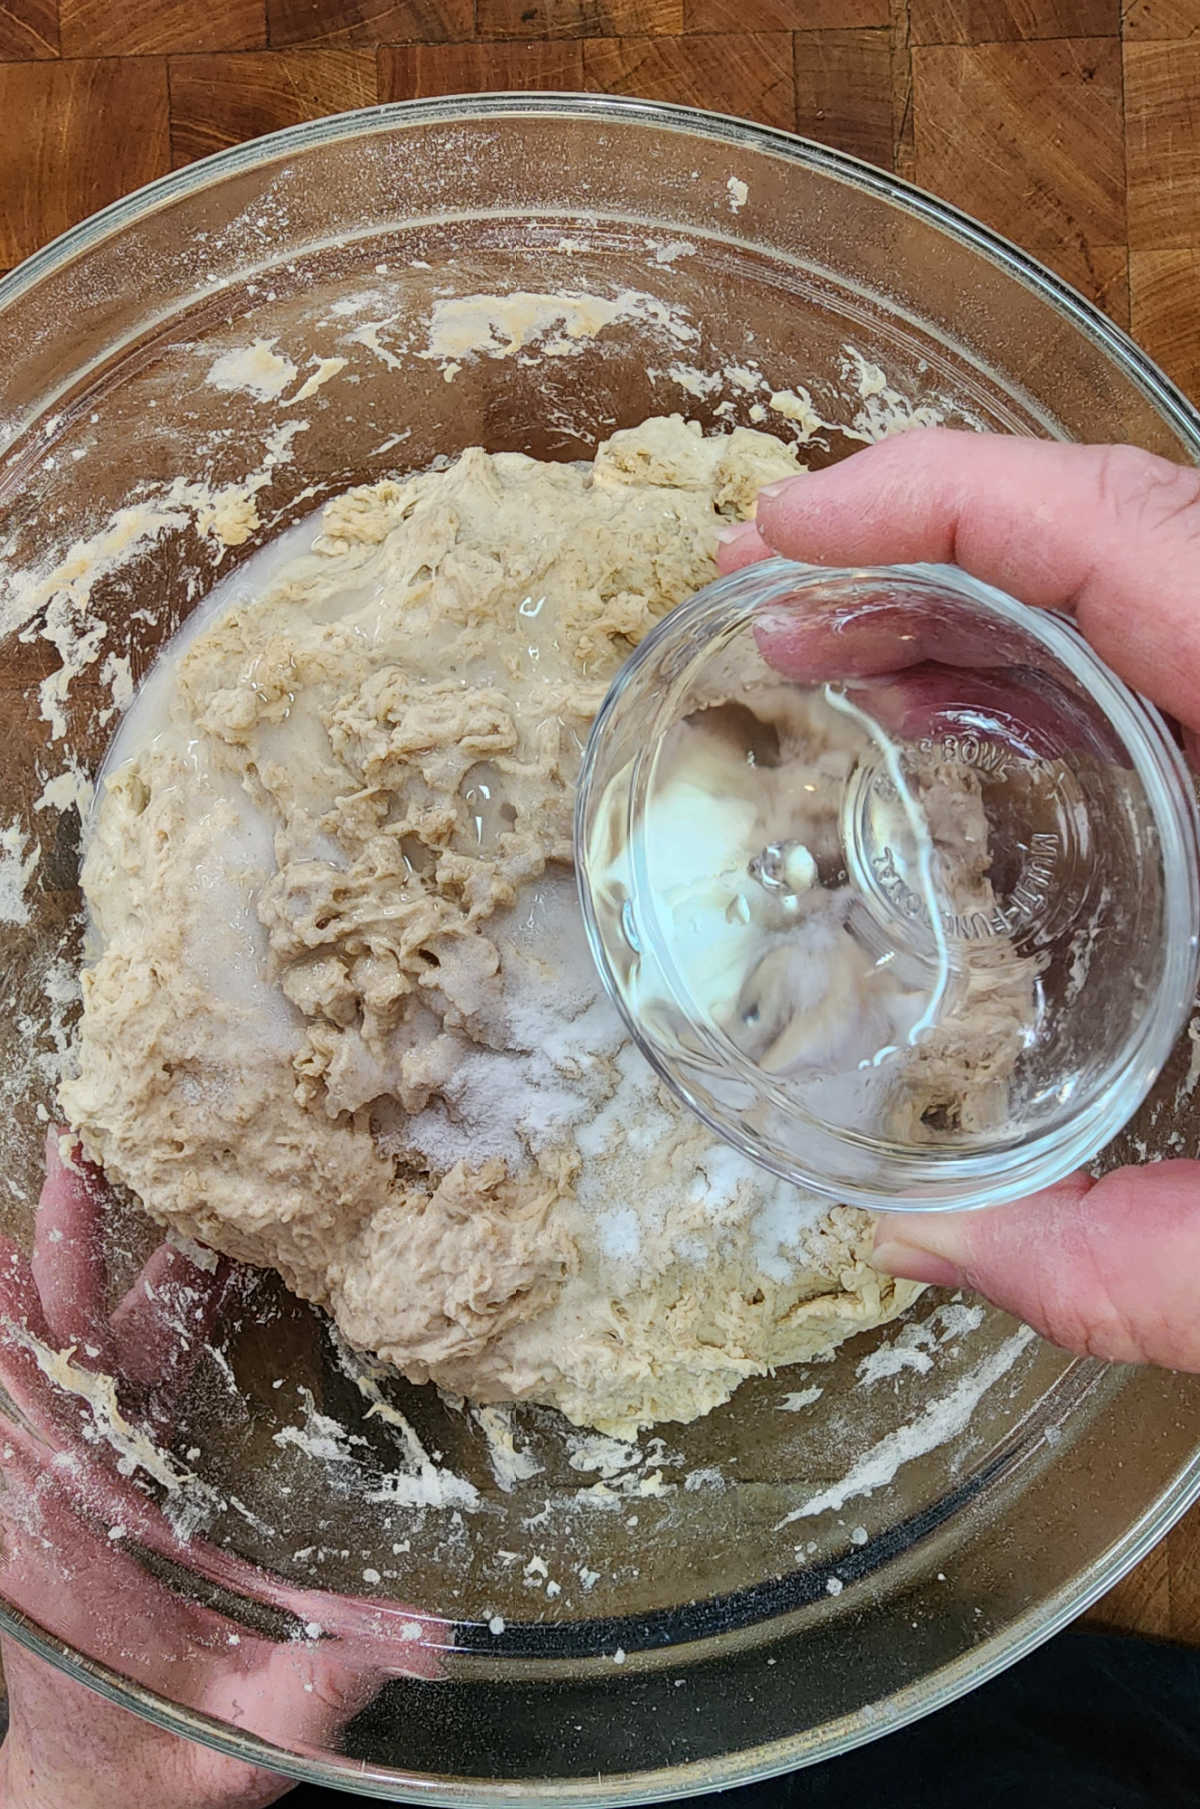 Hand pouring water over sourdough dough in clear glass bowl on butcher block.